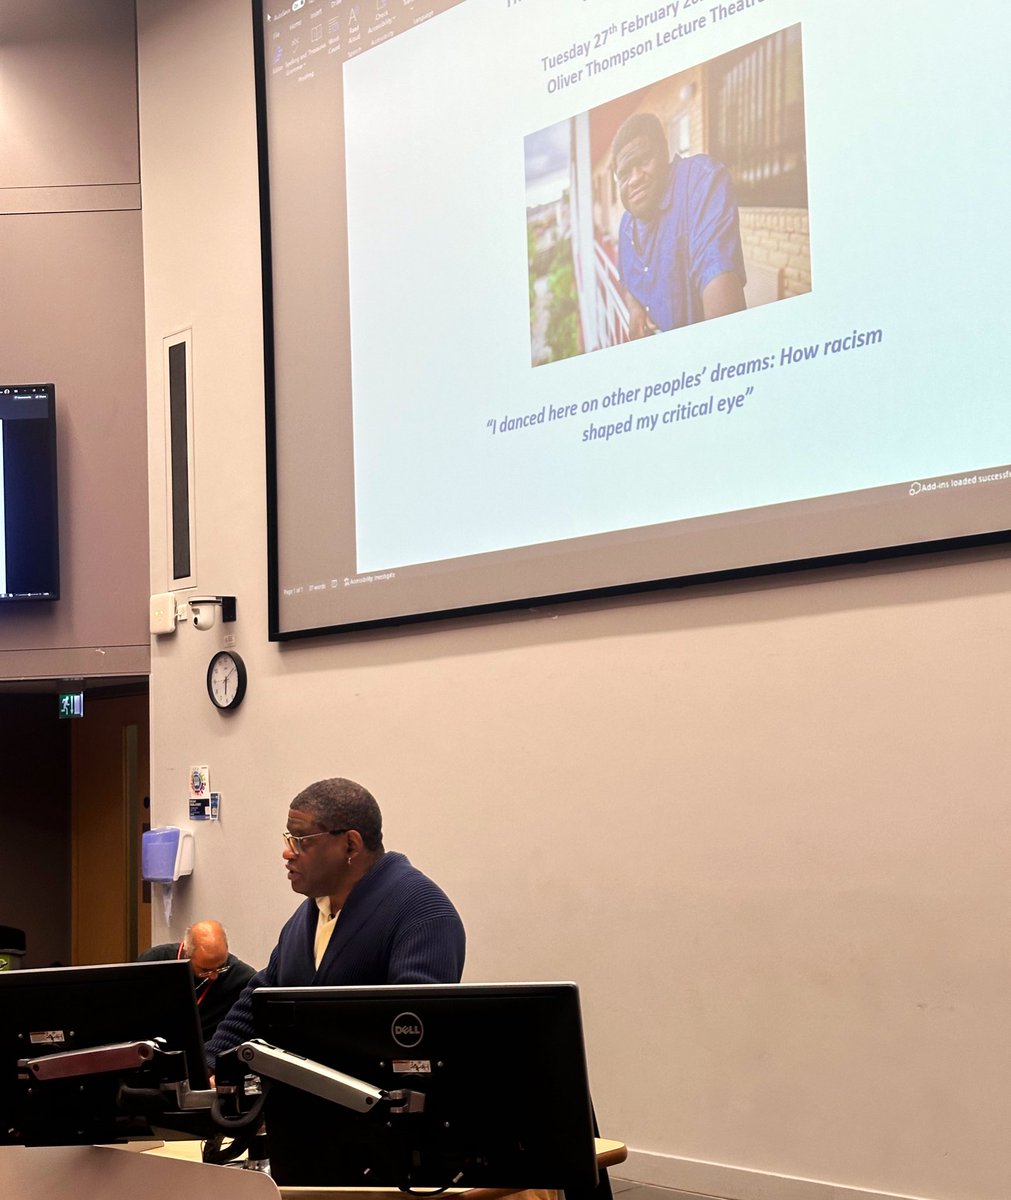 Powerful to be hearing from @cityjournalism alum @garyyounge - talking about how racism shaped his critical eye, in the inaugural Rosemary Hollis lecture @CityUniLondon